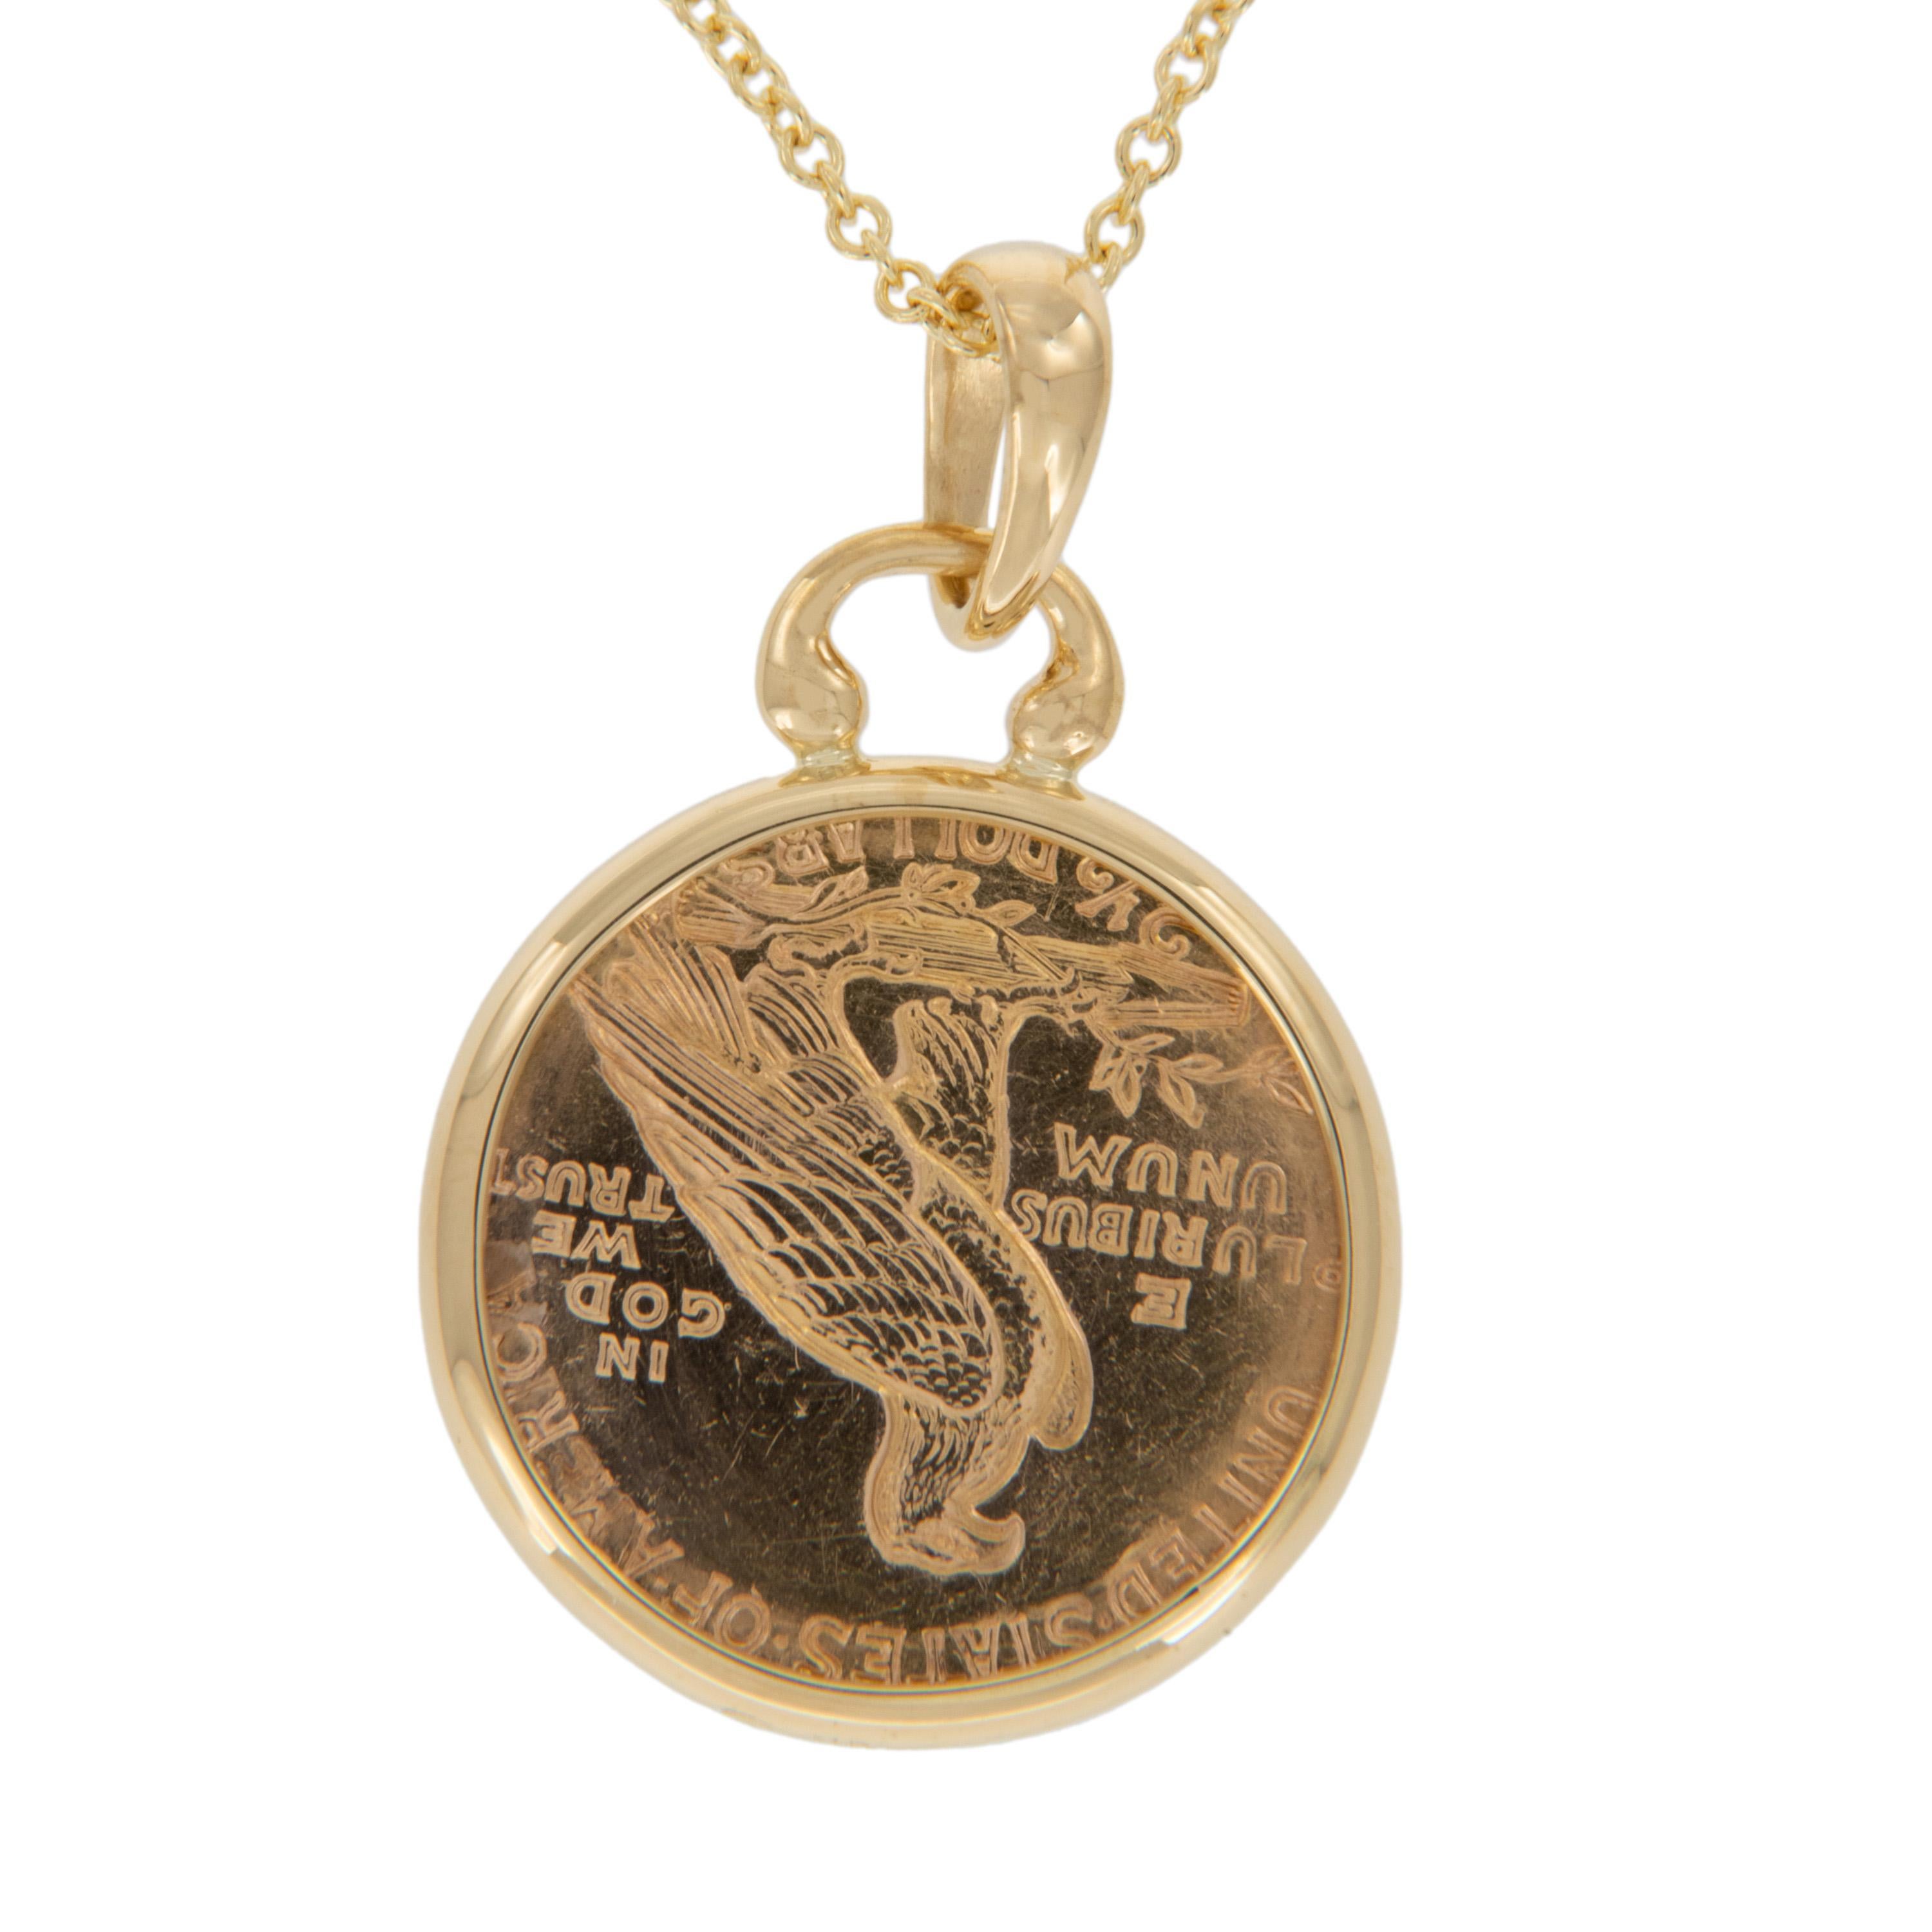 Enjoy a piece of American gold coin history! This 1910 $2.50 Indian head quarter eagle coin is framed by designer Michael Bondanza in 18k yellow gold and suspends from a U shaped -style bail on a 16-inch chain. Pendant measures 25mm tall x 19mm